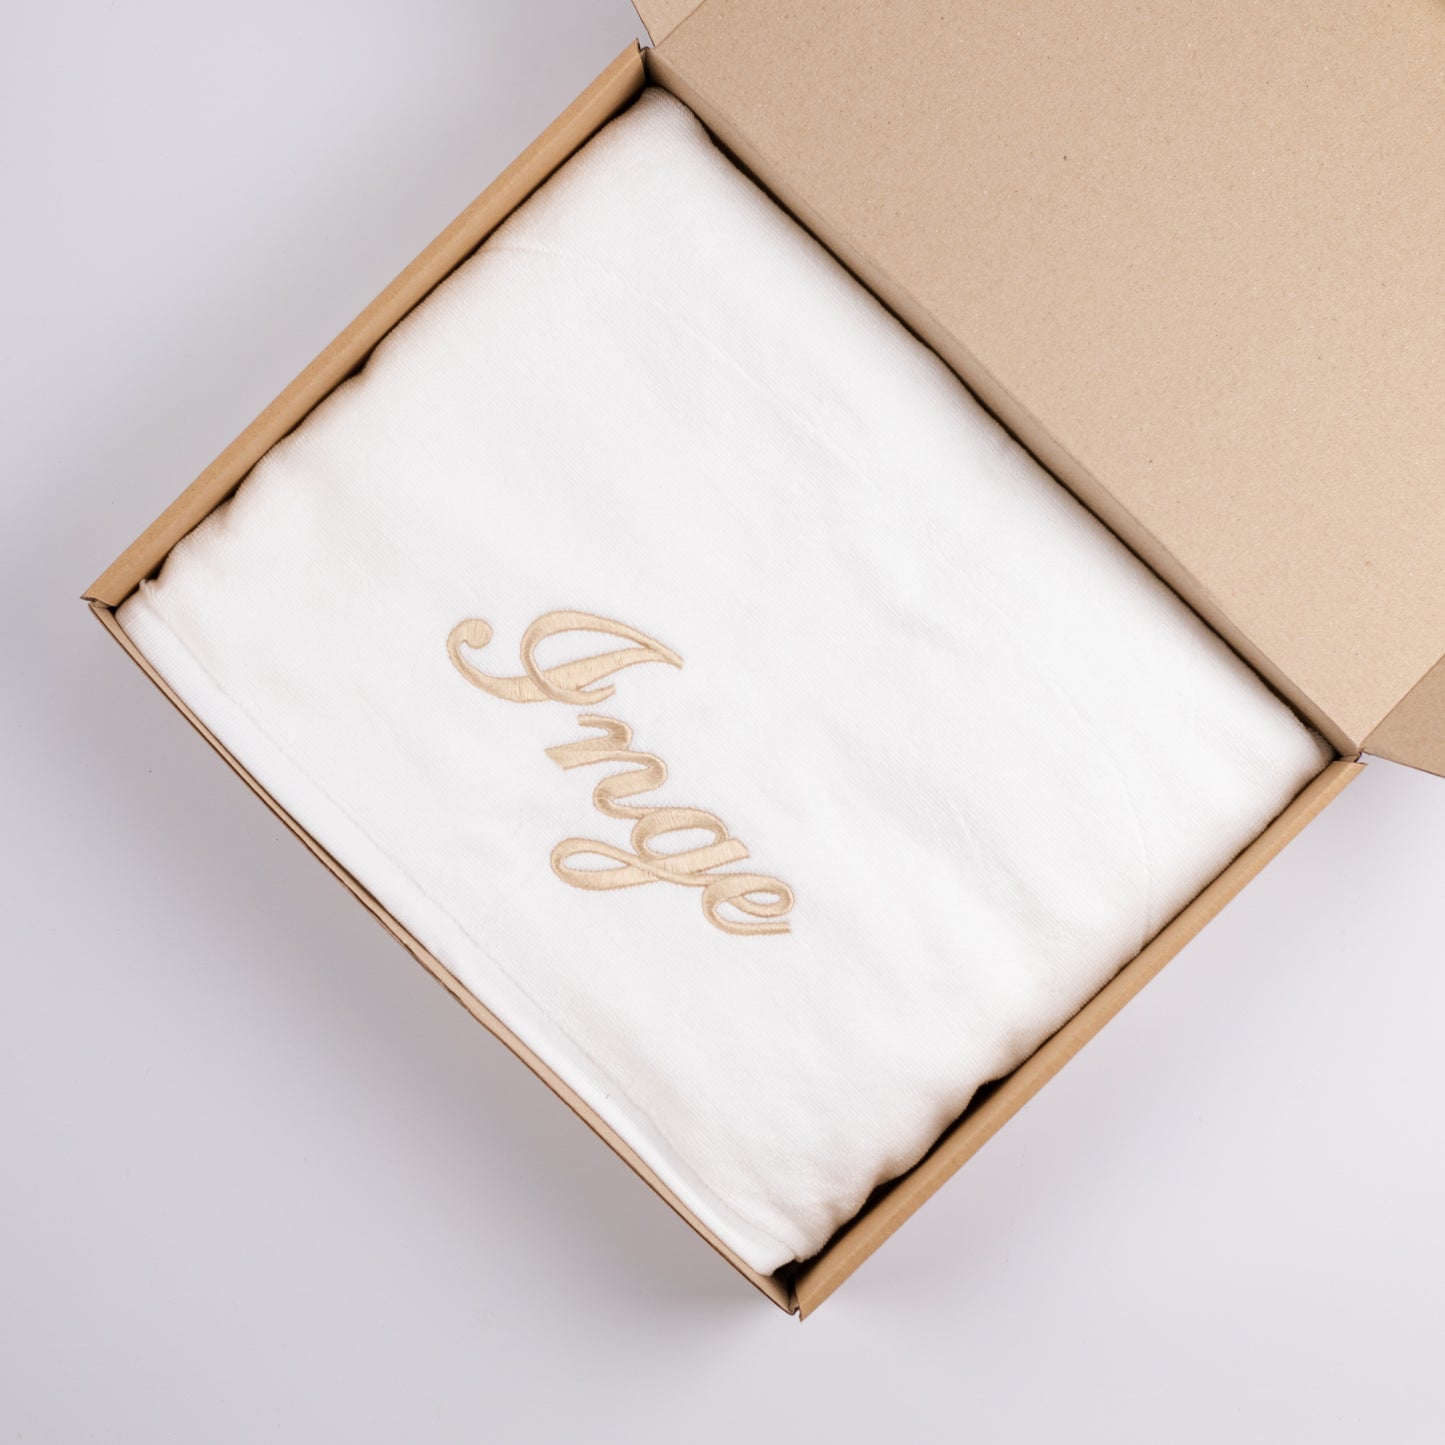 Luxe (~600 GSM) Personalized Bath Towel Box